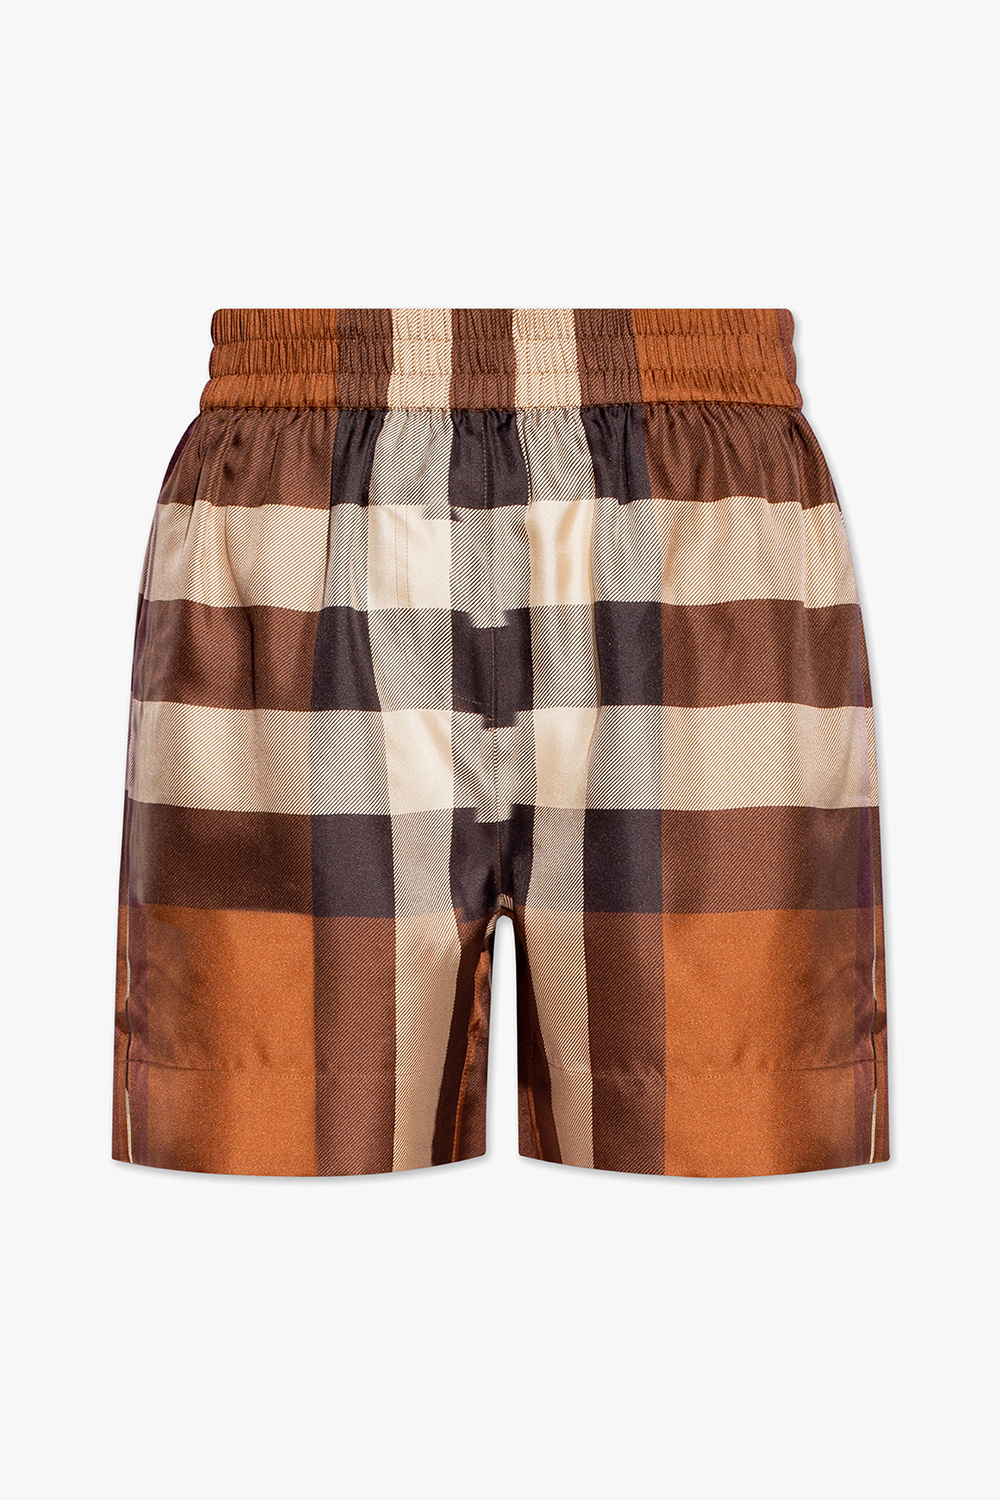 Burberry ‘Tawney’ checked shorts